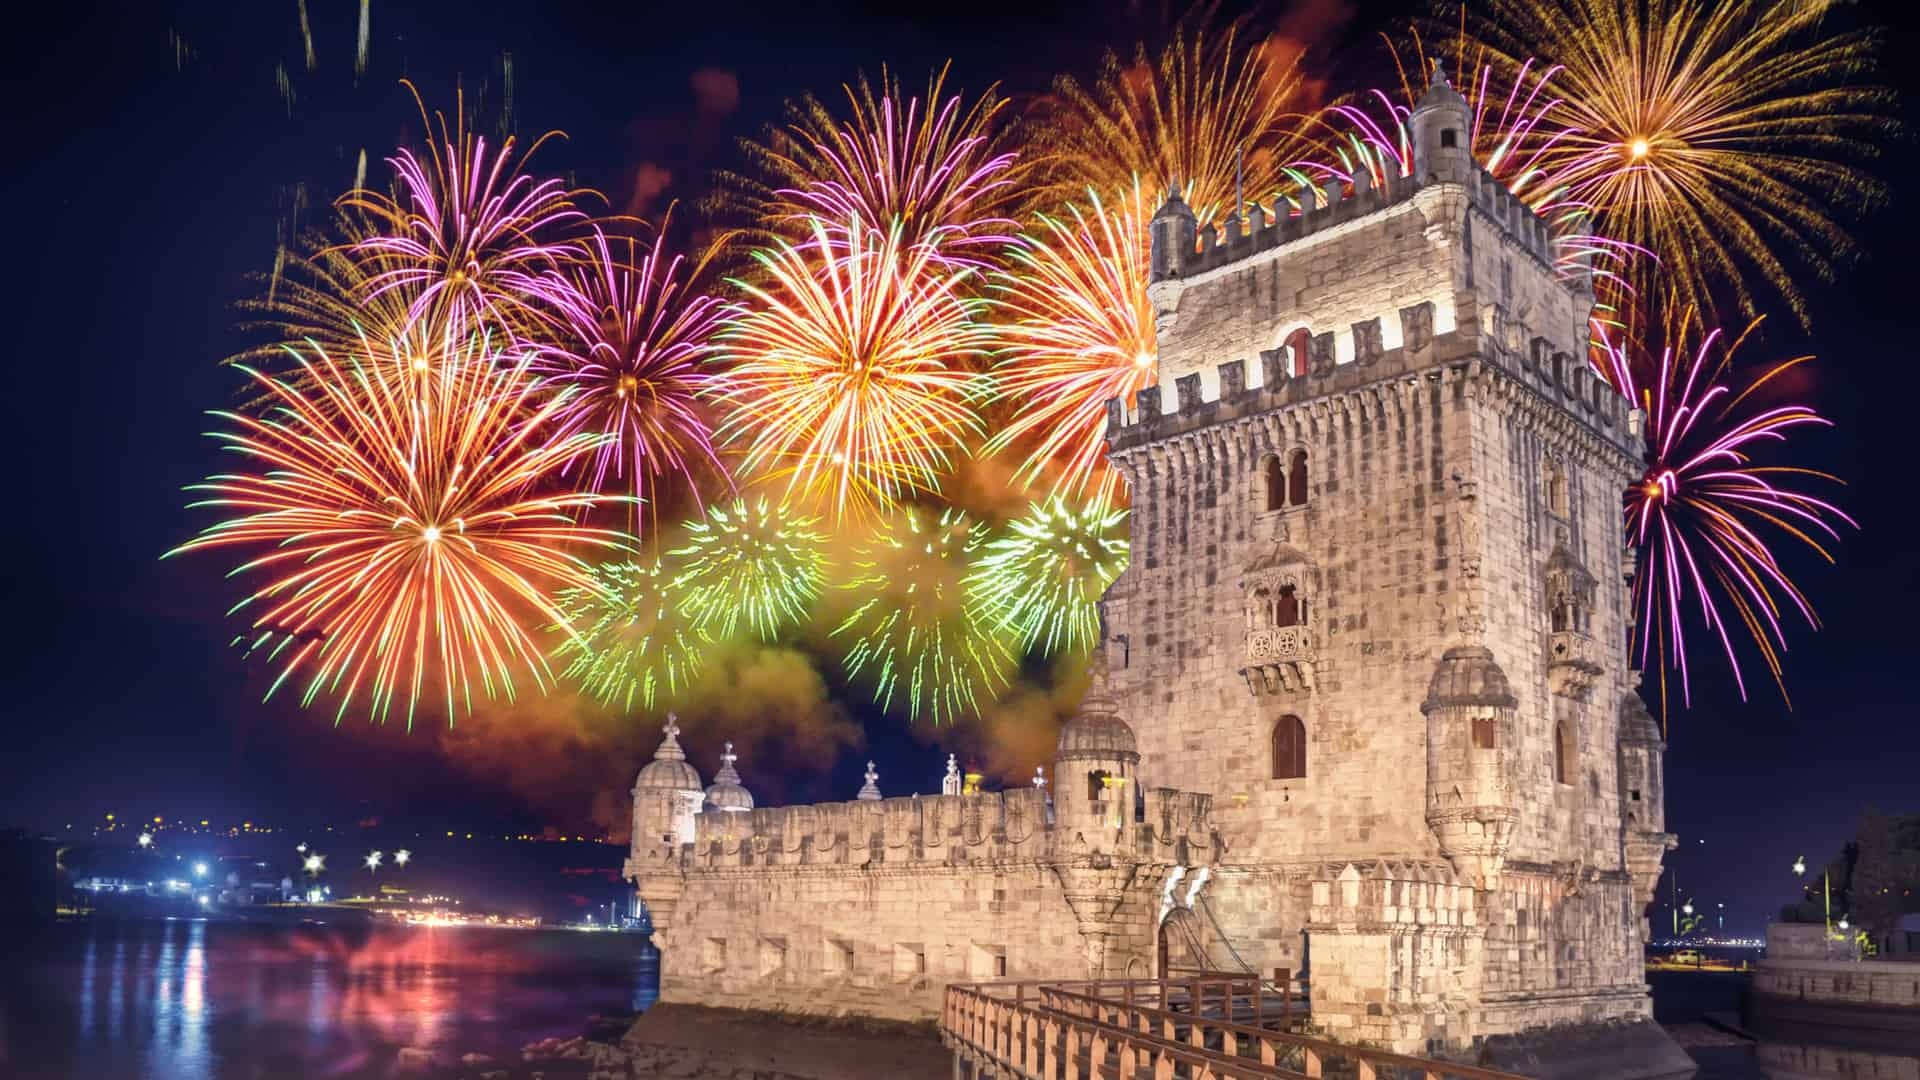 Belem Tower, Family events, Portugal travel, Top attractions, 1920x1080 Full HD Desktop